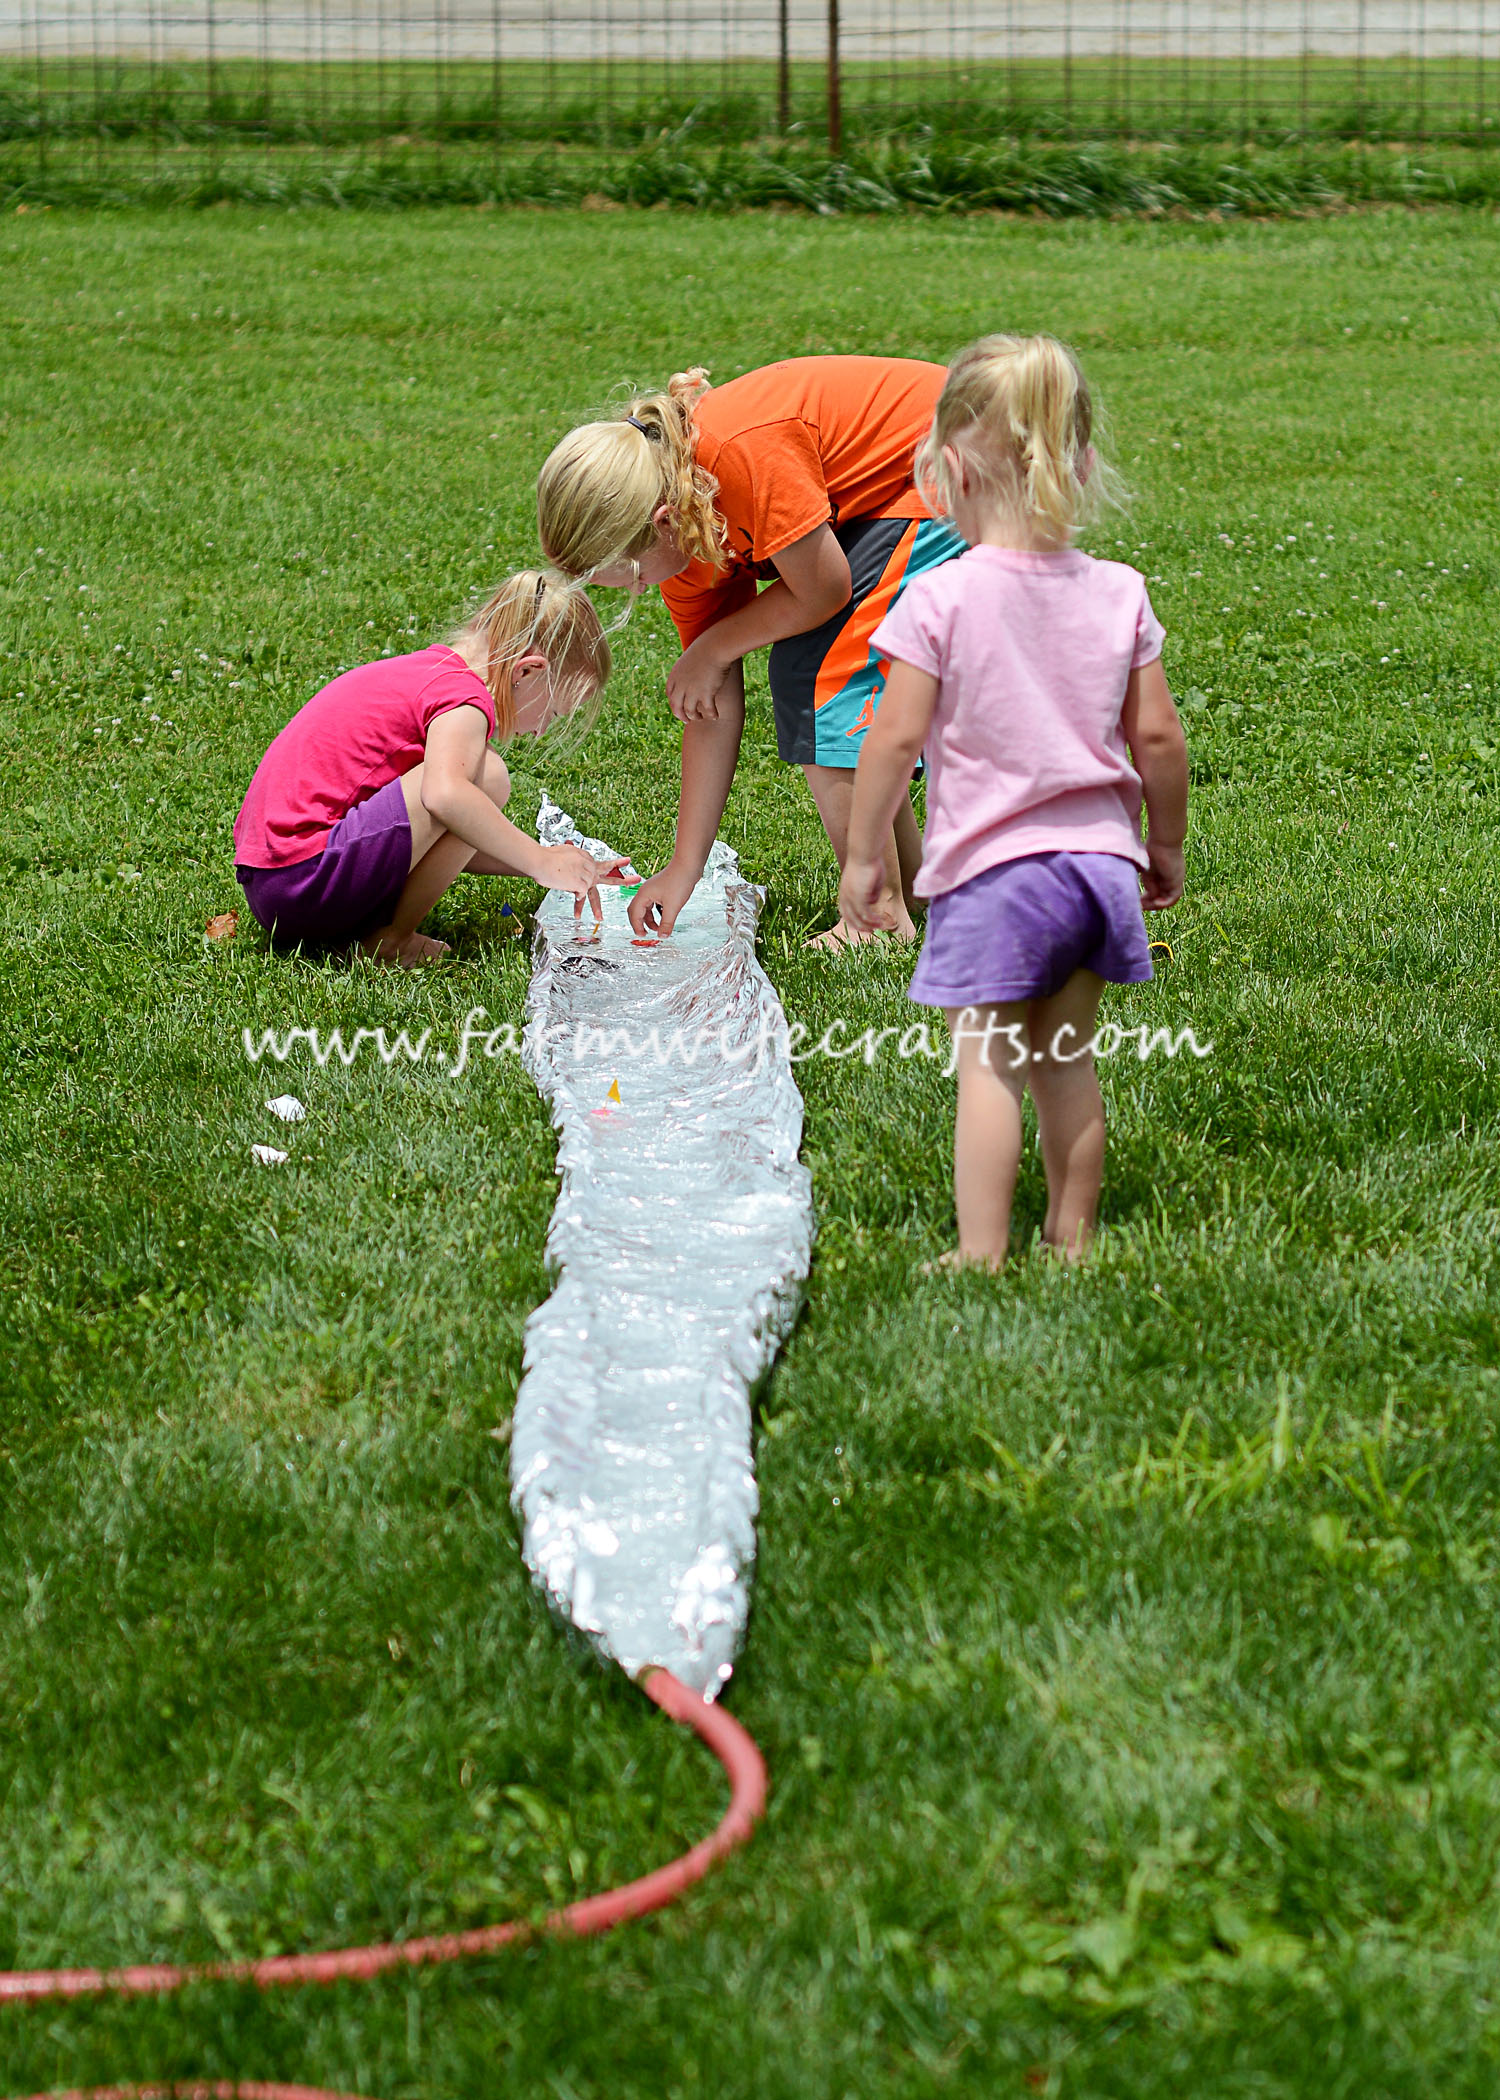 This tin foil river is an easy way to get kids outside this summer!